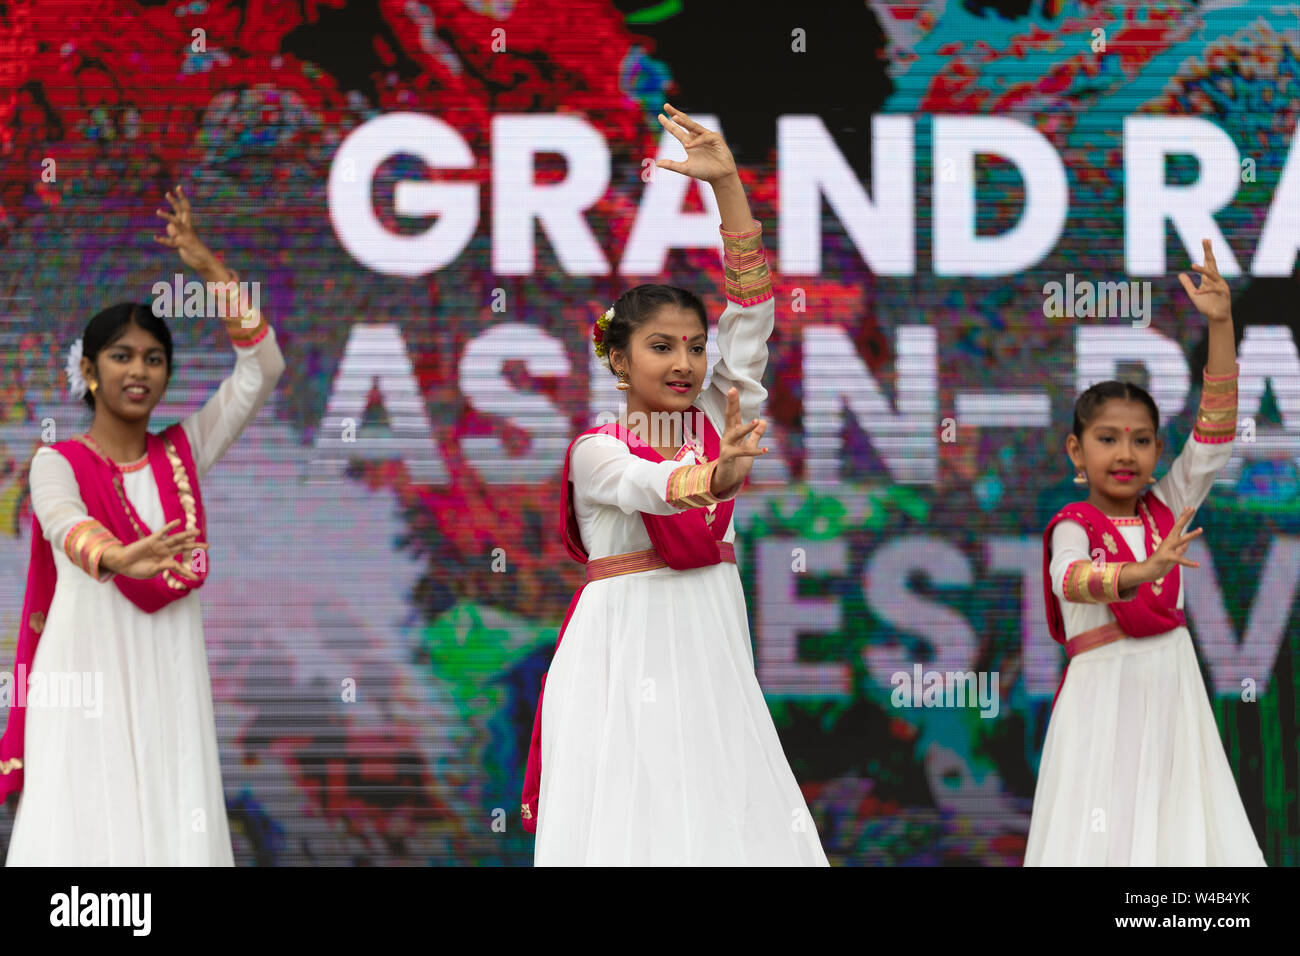 Grand Rapids, Michigan, USA - June 15, 2019: Asian Pacific Festival, Indian dancers wearing traditional clothing, performing a display of traditional Stock Photo